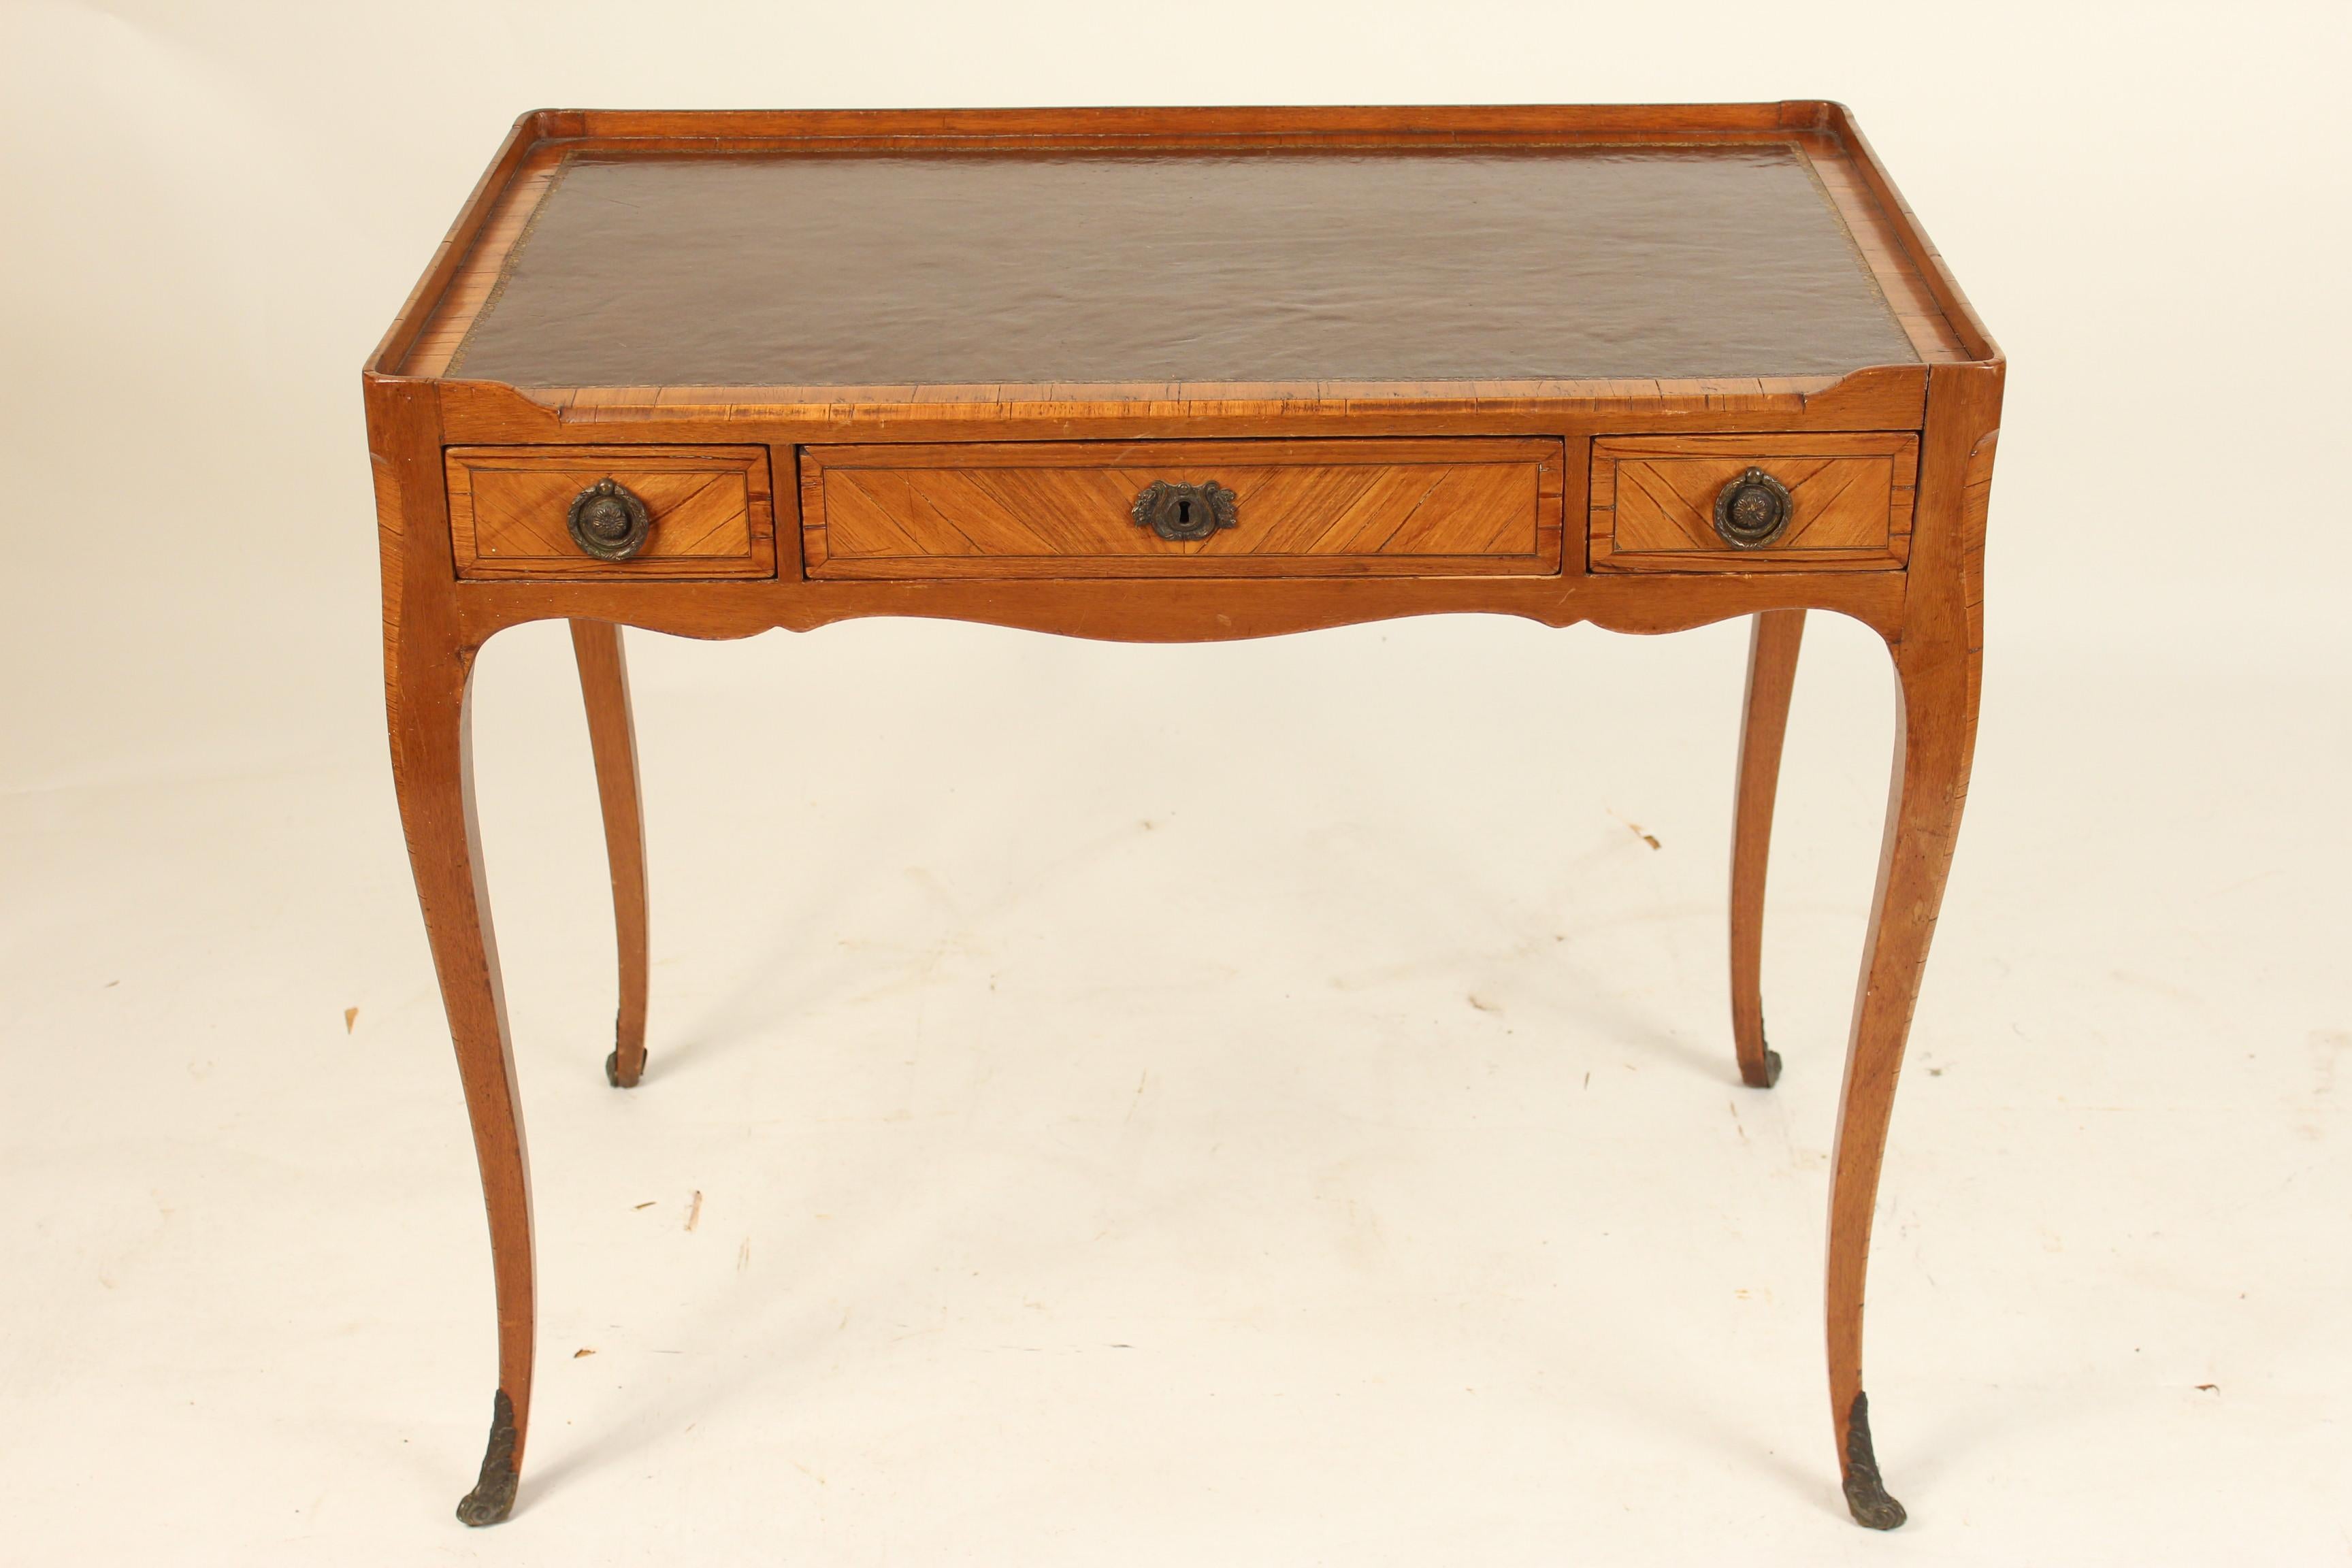 Antique Louis XV style tulip wood and beechwood writing table with a tooled leather top and bronze pulls and sabots, circa 1890-1910. Measures: Height to writing surface 29.5